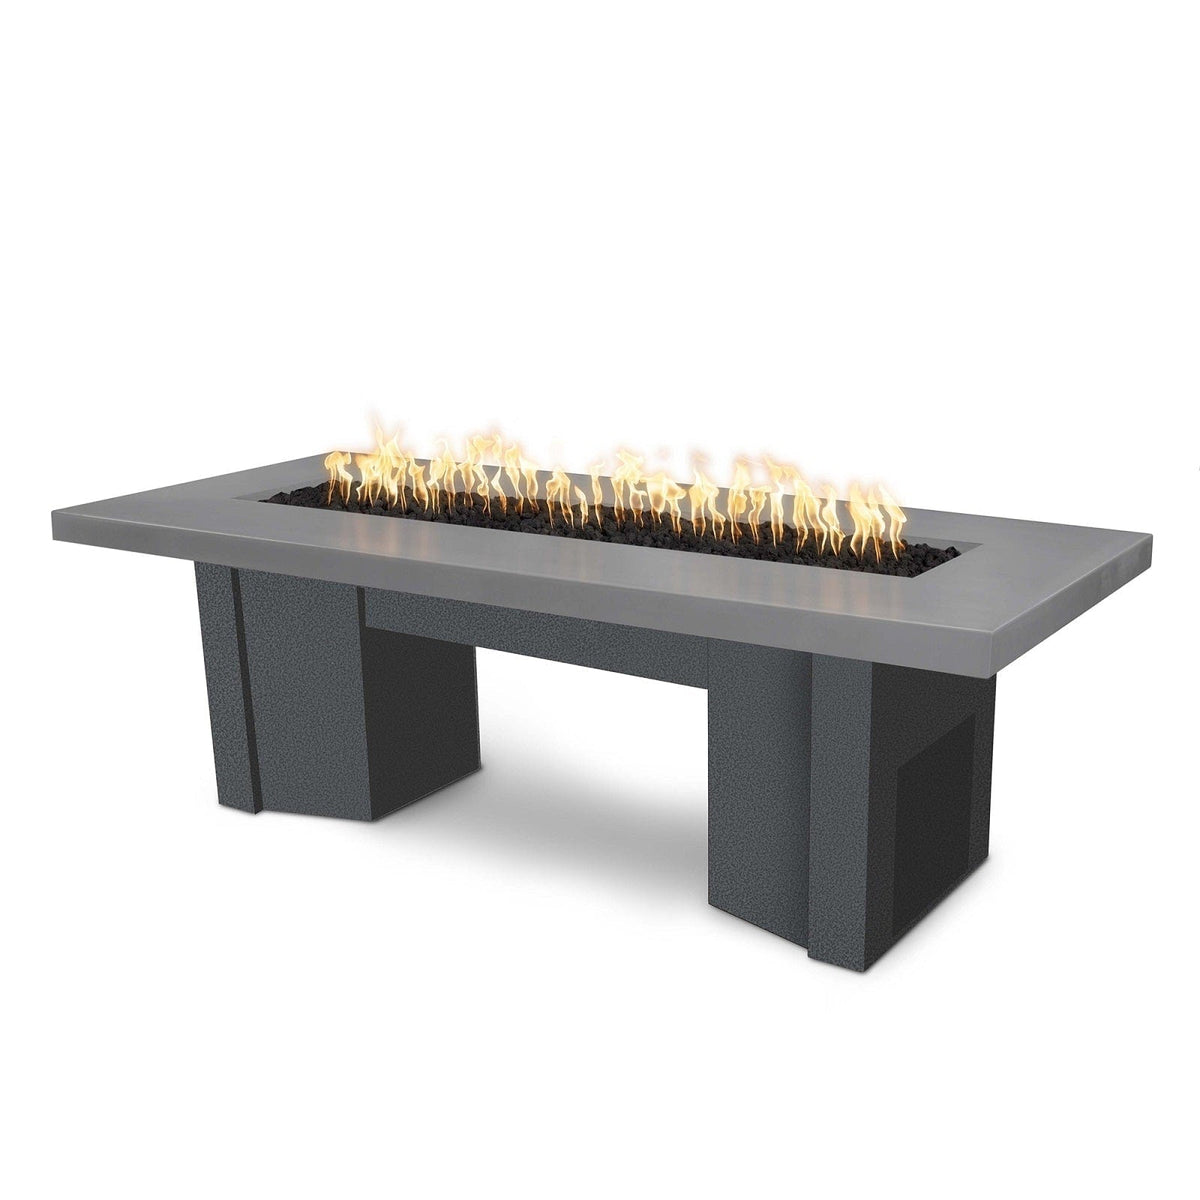 The Outdoor Plus Fire Features Natural Gray (-NGY) / Silver Vein Powder Coated Steel (-SLV) The Outdoor Plus 78&quot; Alameda Fire Table Smooth Concrete in Liquid Propane - 110V Plug &amp; Play Electronic Ignition / OPT-ALMGFRC78EKIT-LP